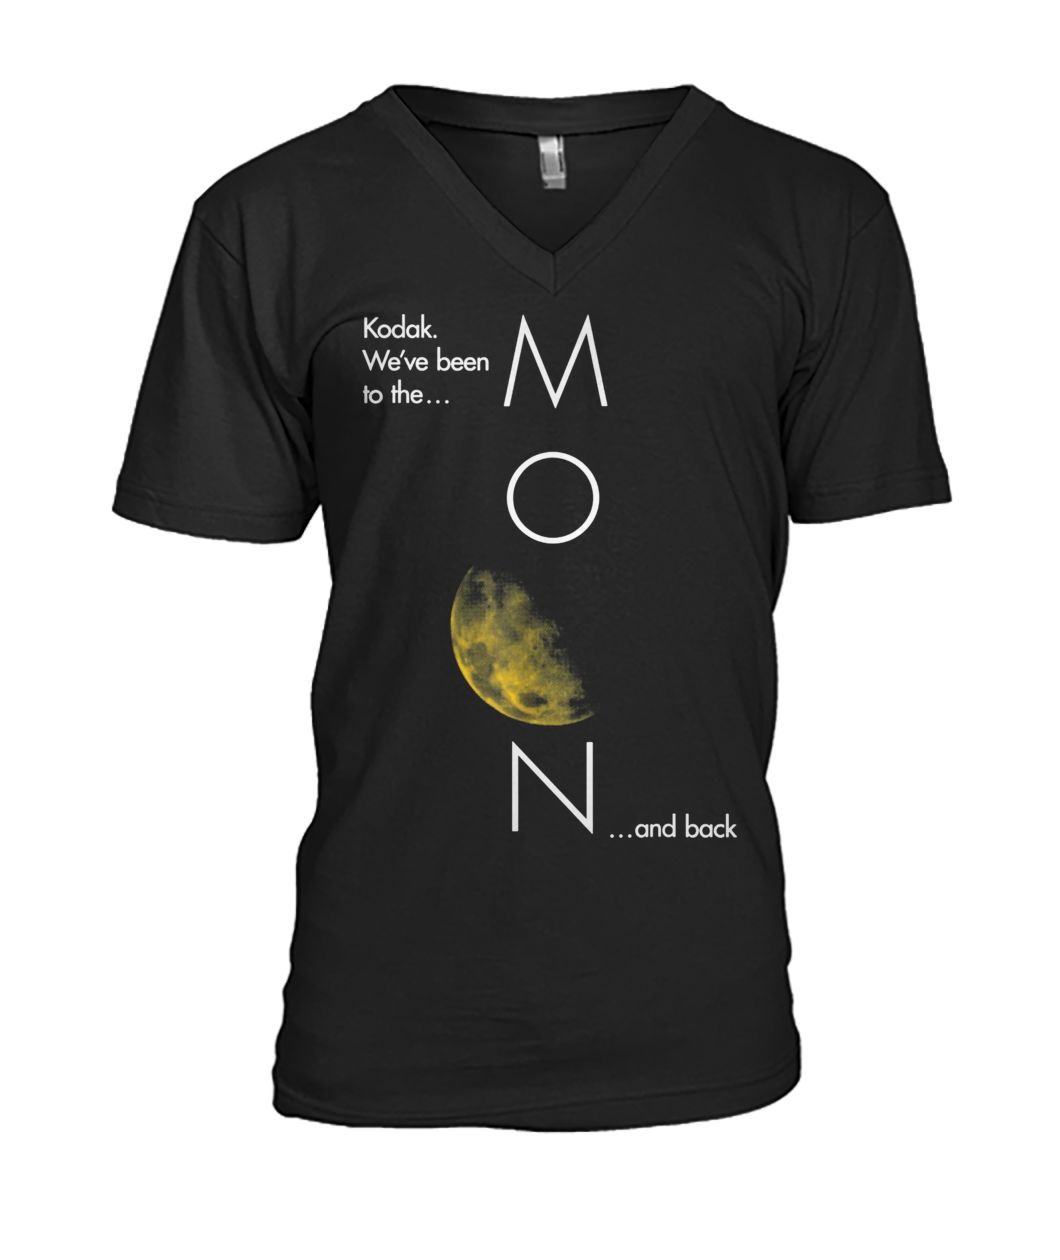 Kodak been to the moon and back mens v-neck